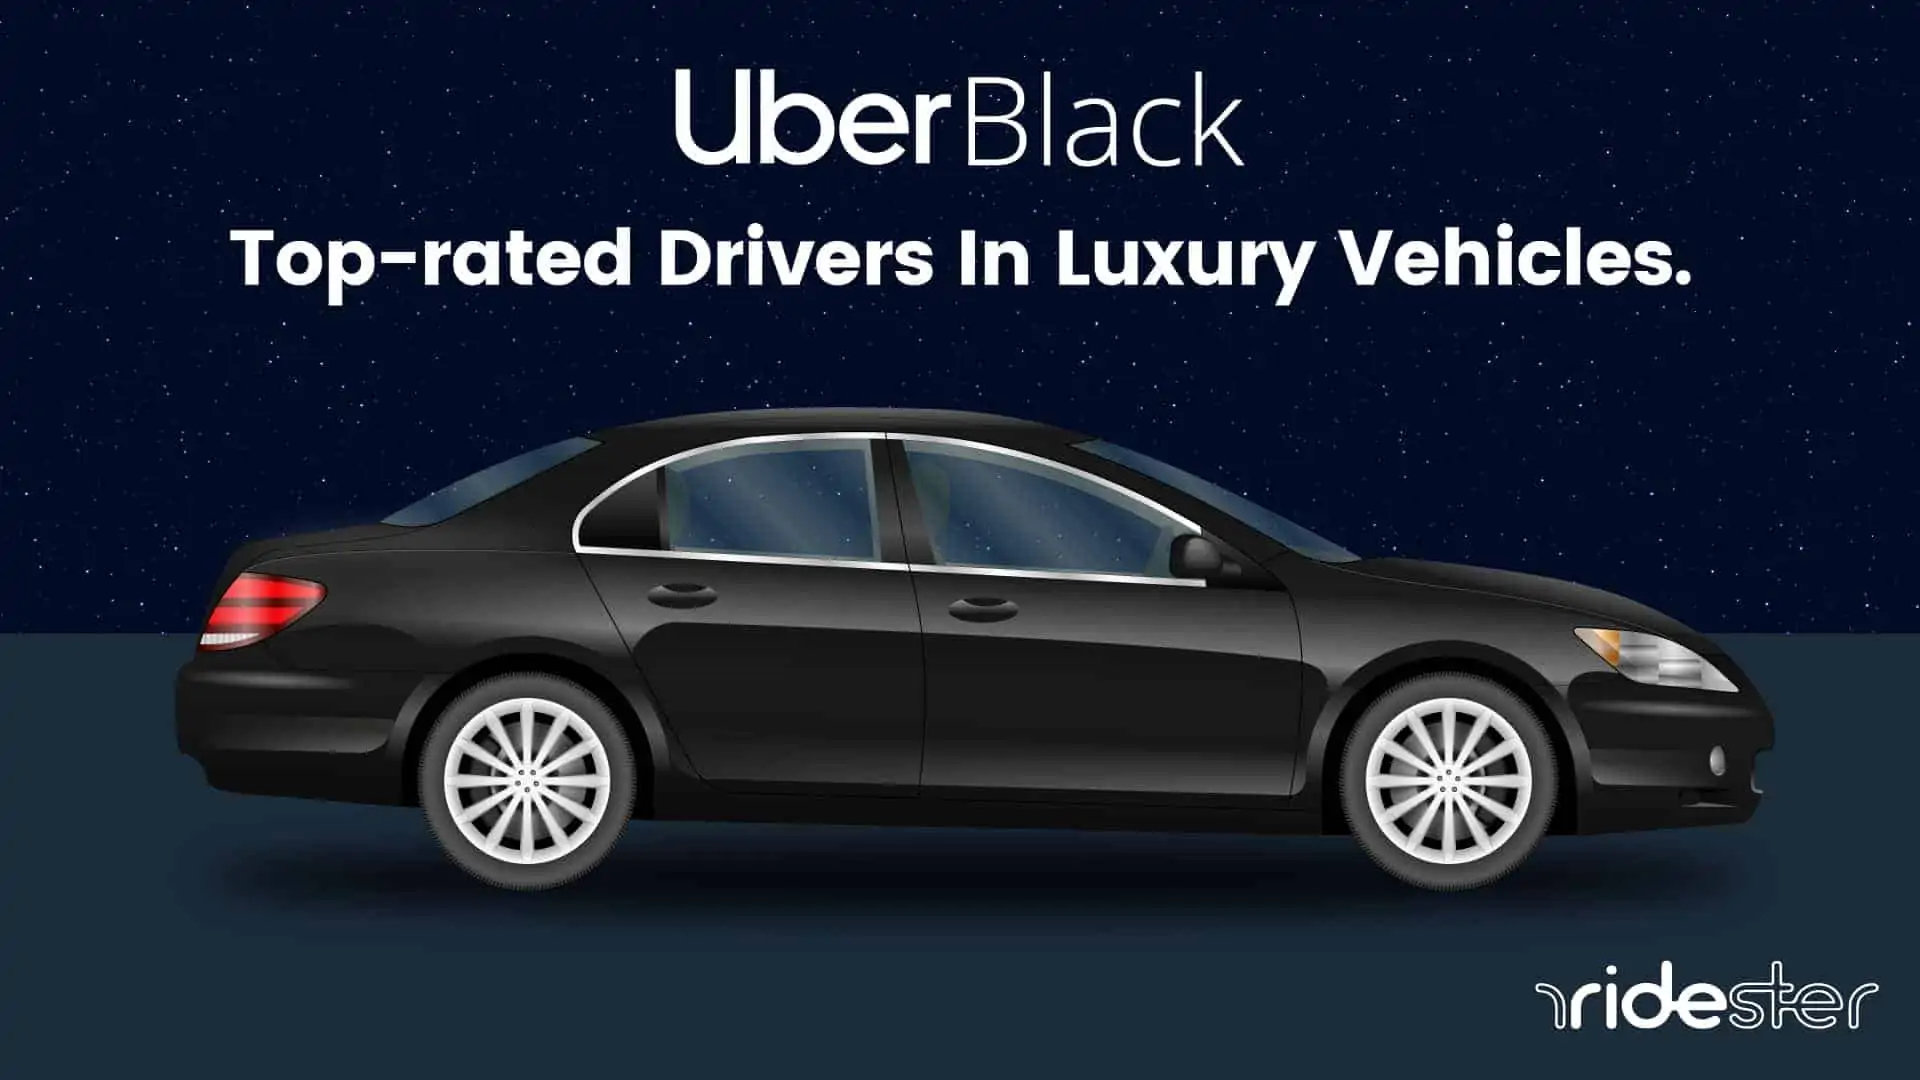 vector graphic showing a luxury vehicle next to the text "Uber Black"